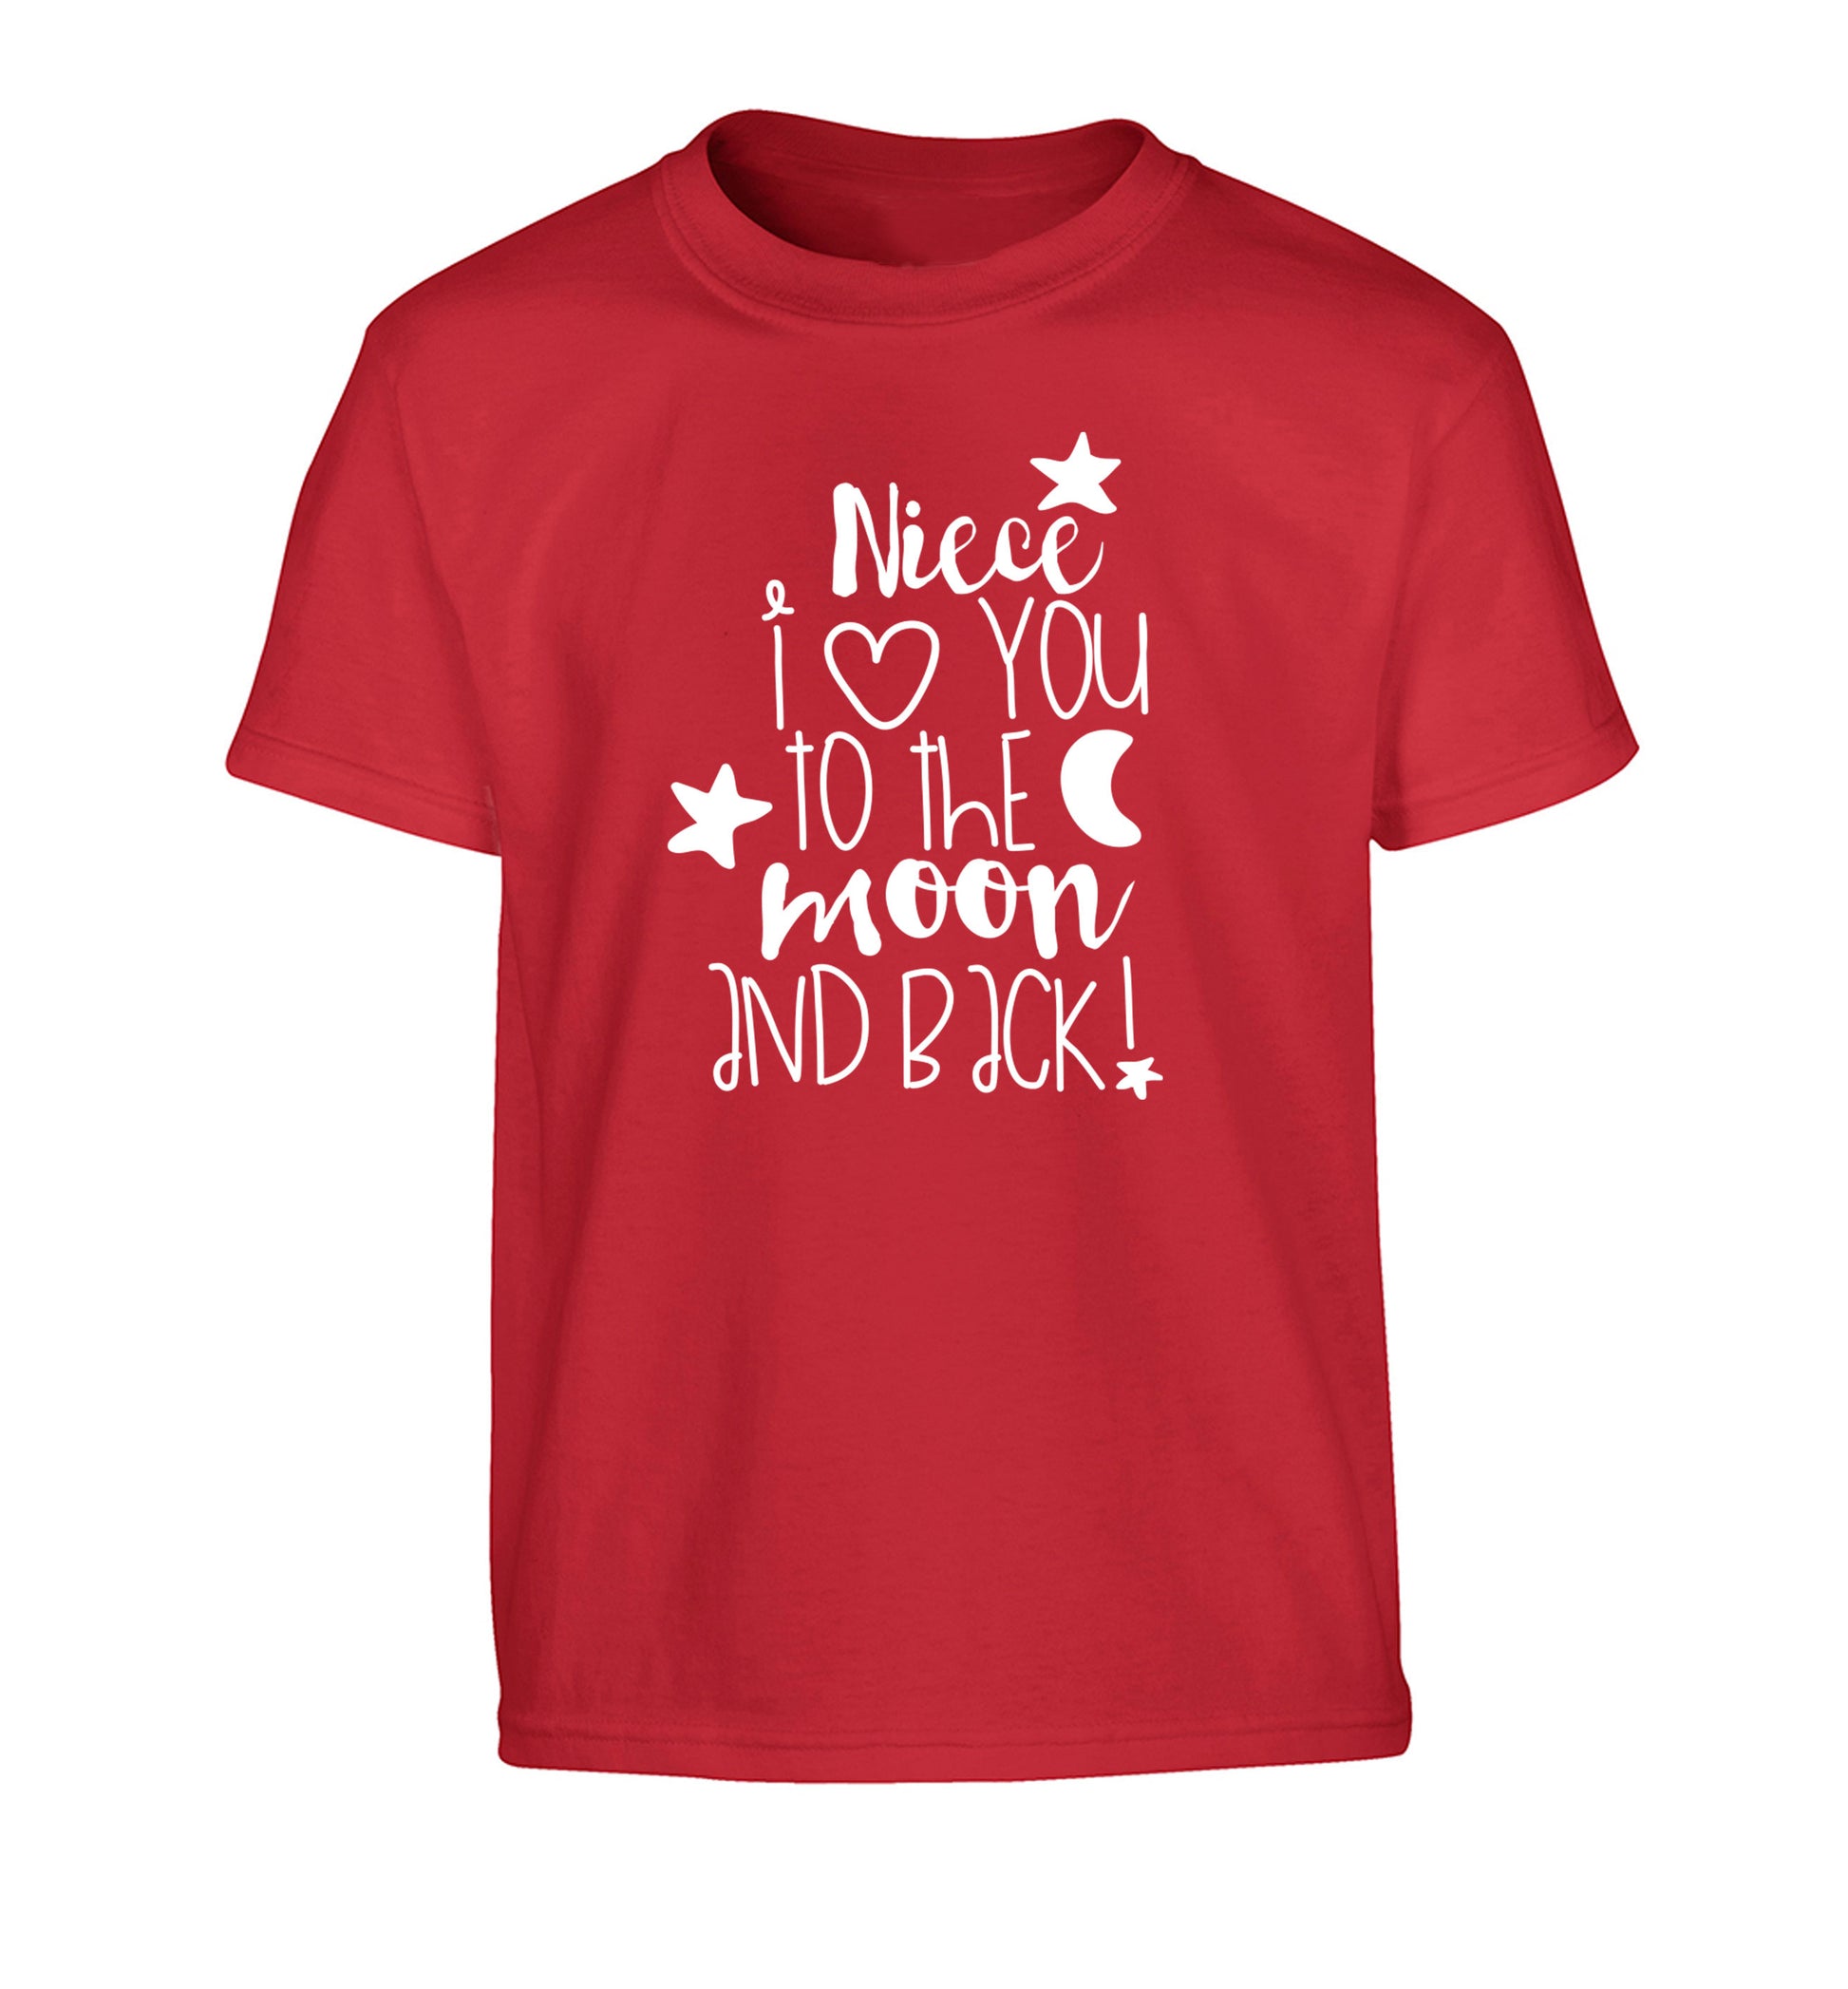 Niece I love you to the moon and back Children's red Tshirt 12-14 Years